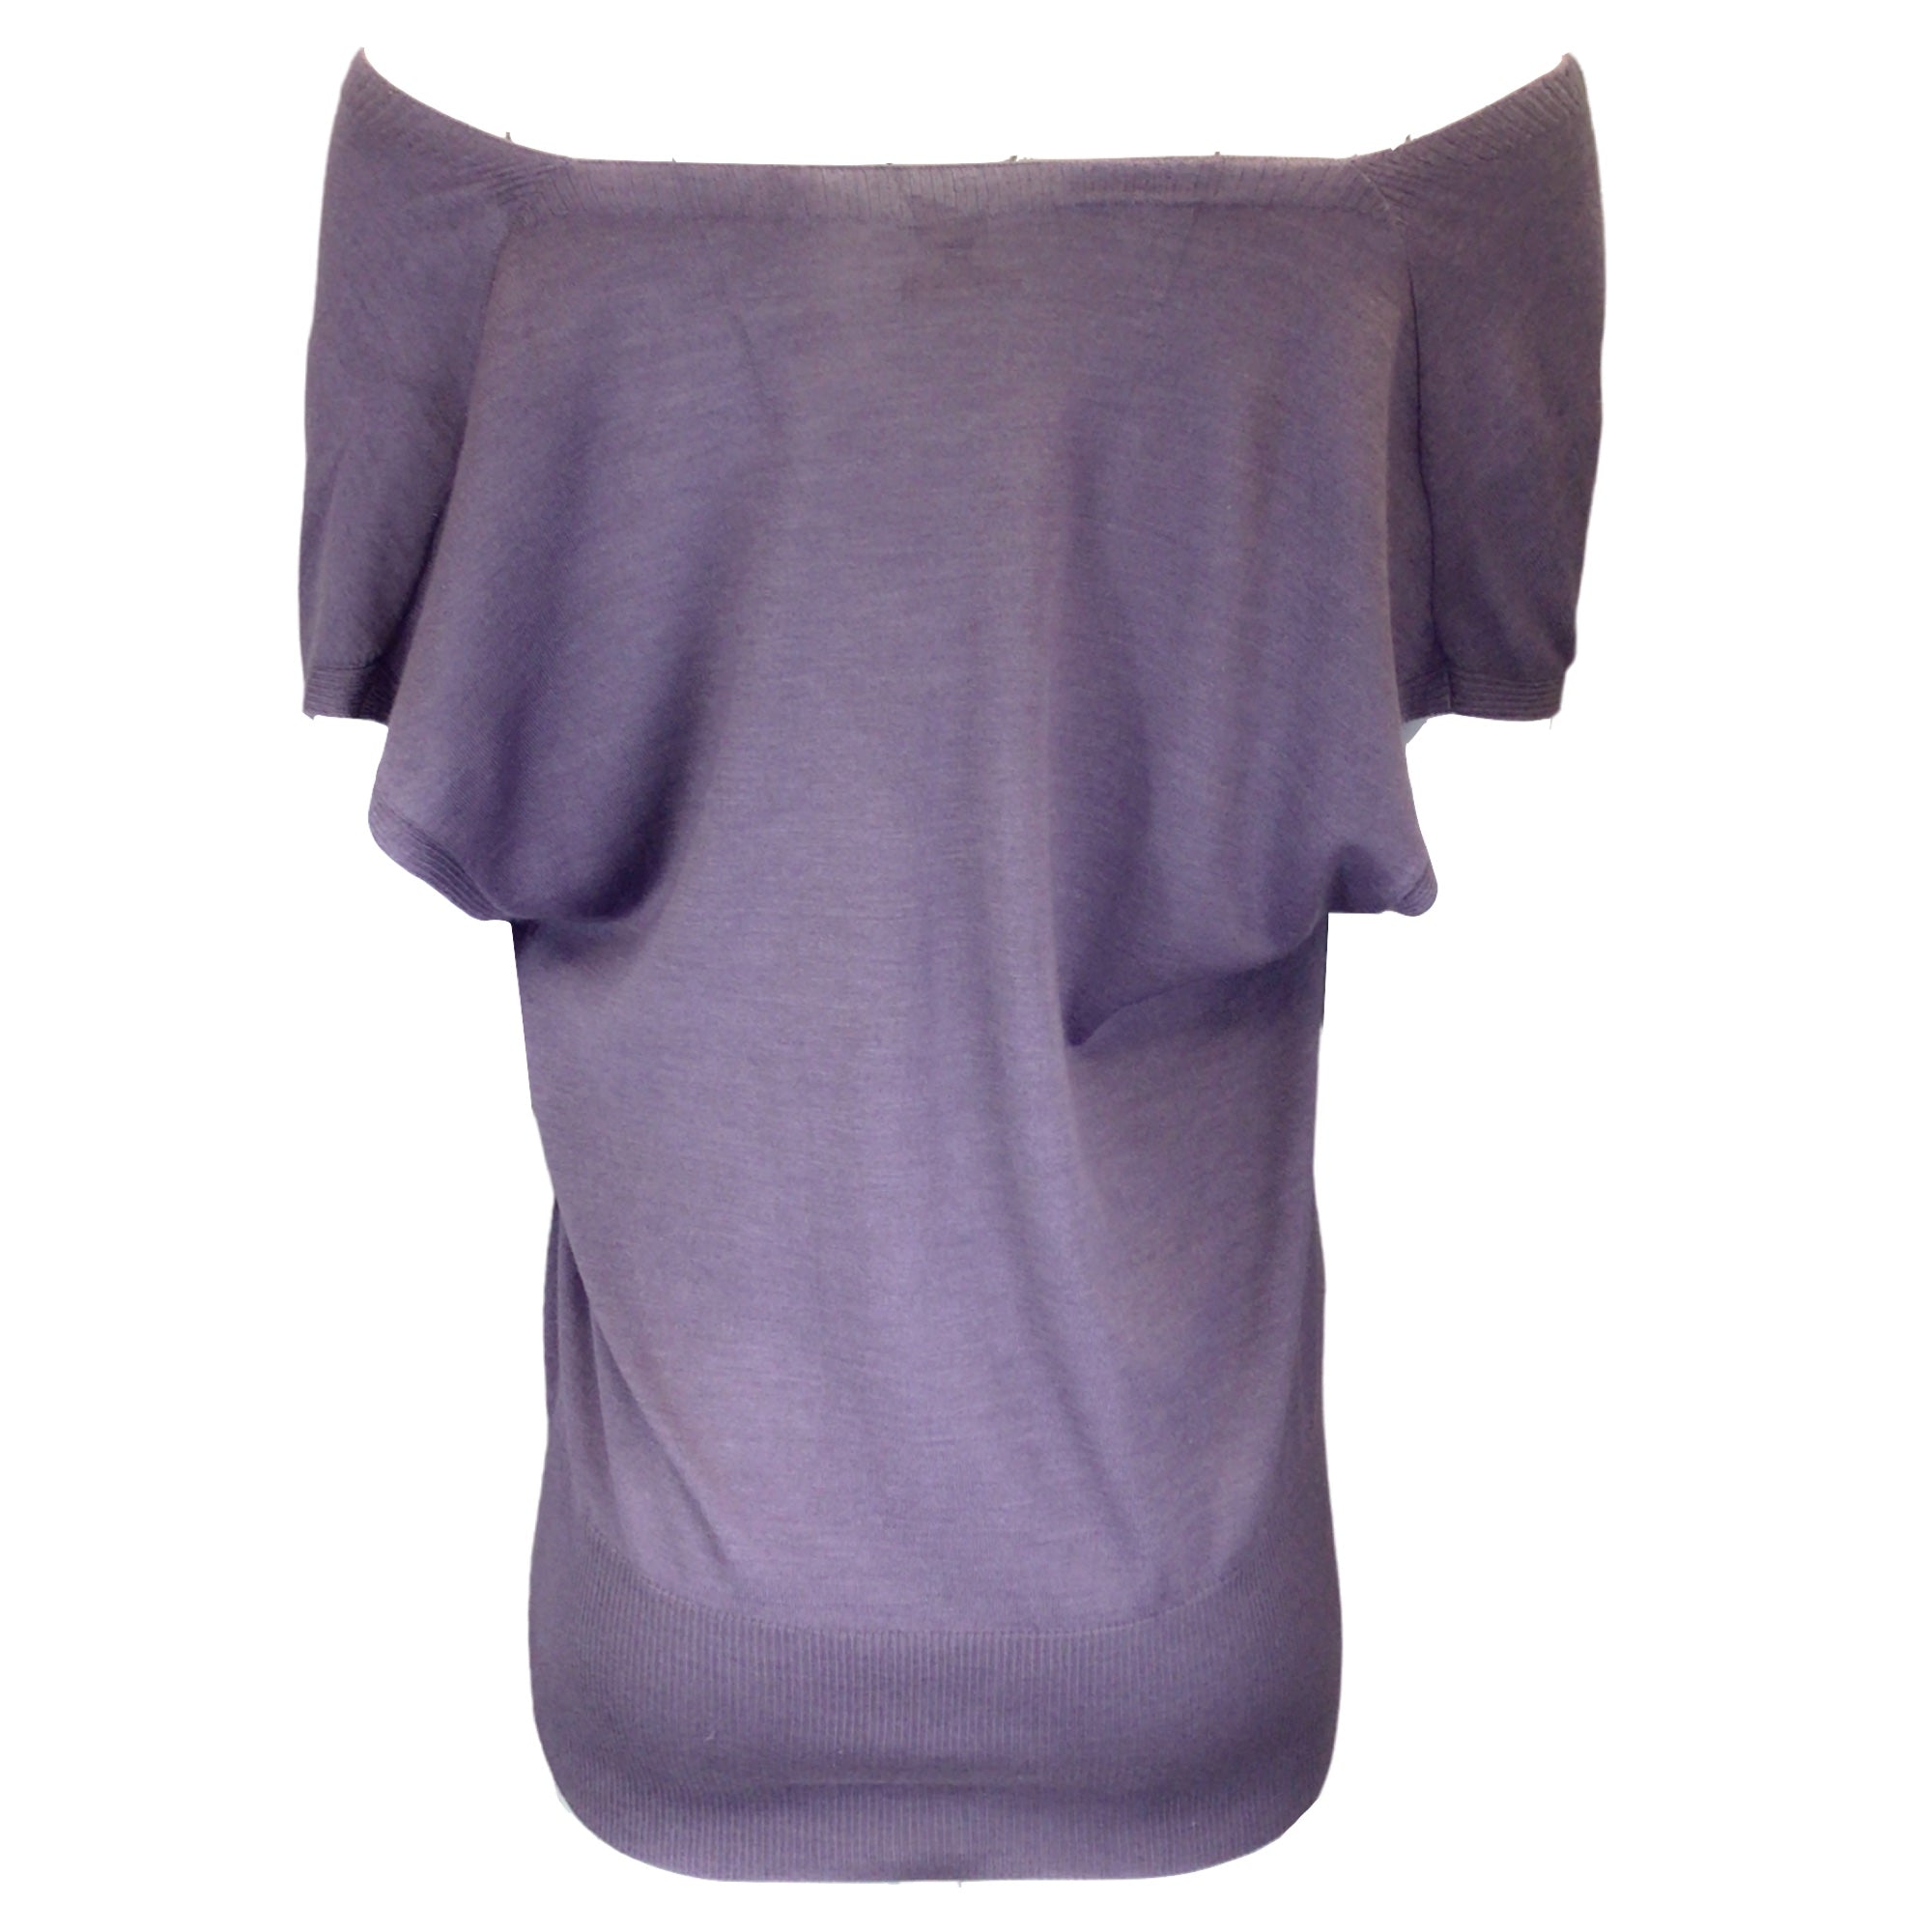 Hermes Purple Cashmere and Silk Knit Pullover Sweater